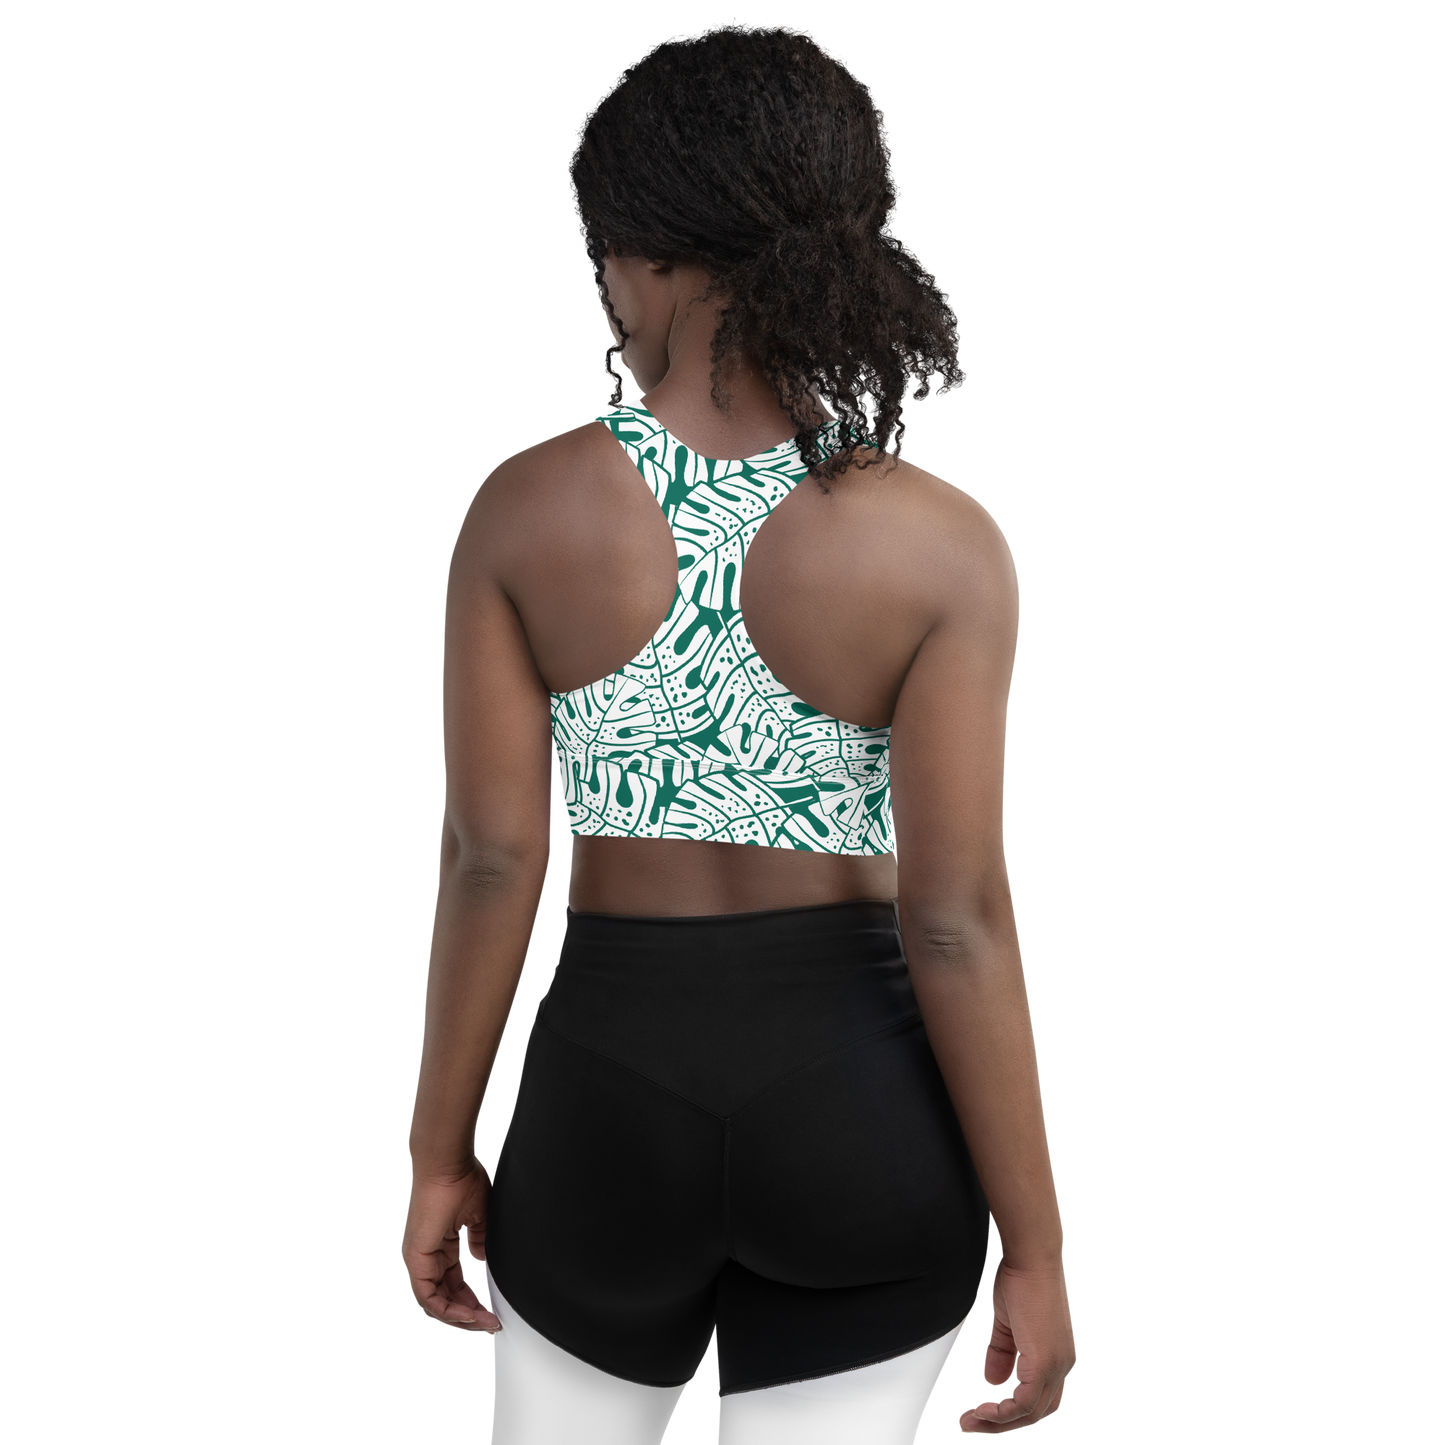 Colorful Fall Leaves | Seamless Patterns | All-Over Print Longline Sports Bra - #9